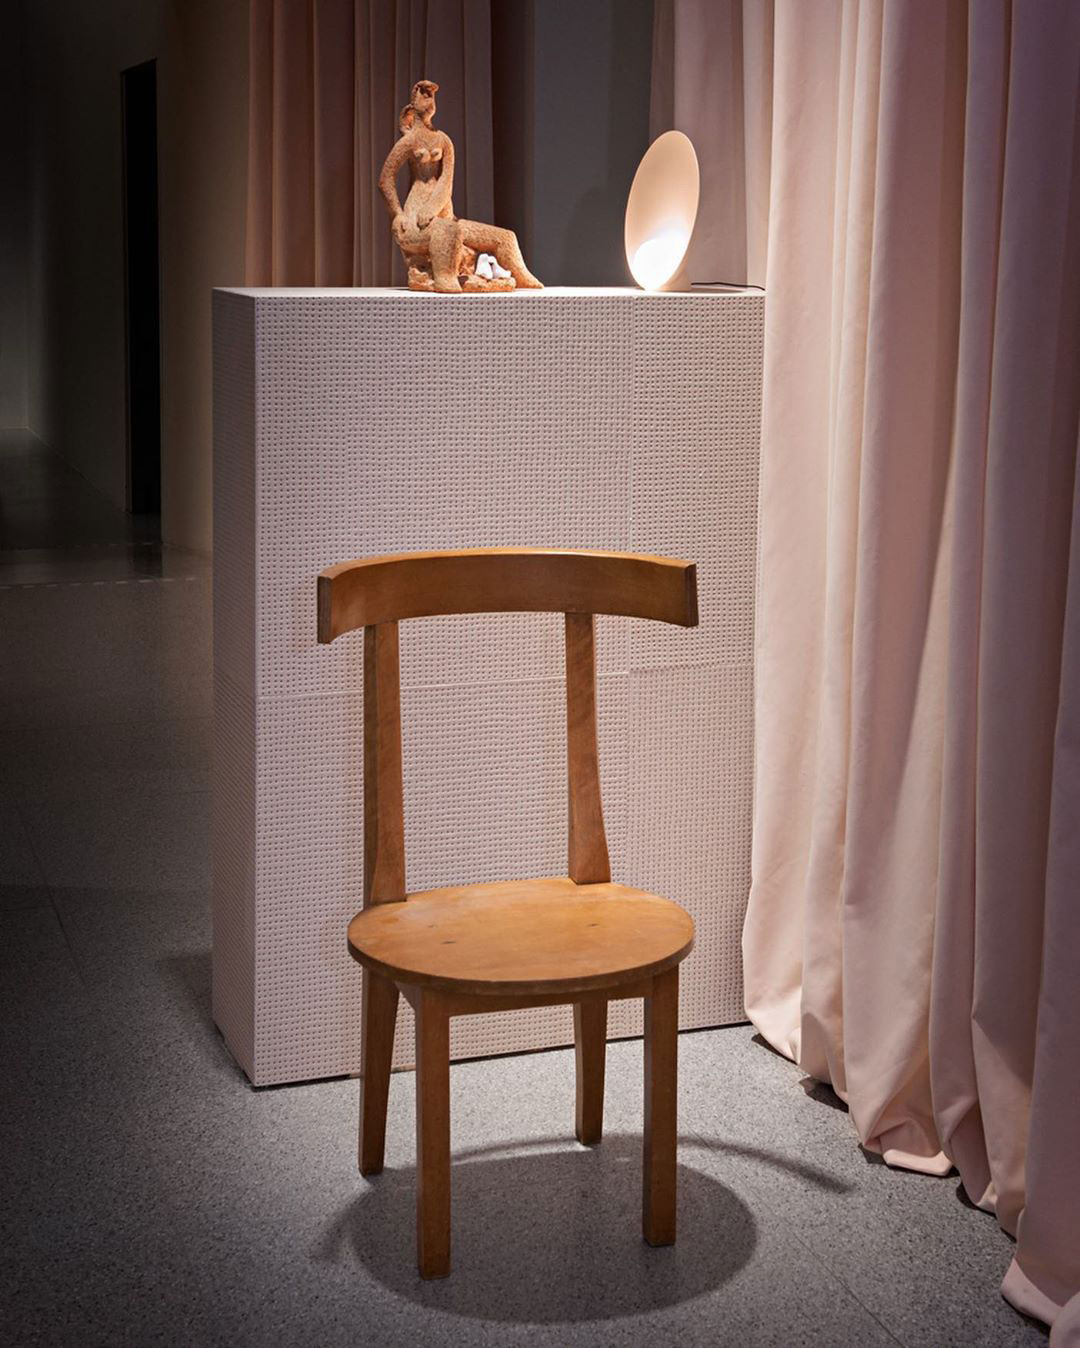 Vibia The Edit - Vibia Featured in an Evocative Installation at the Stockholm Design Week